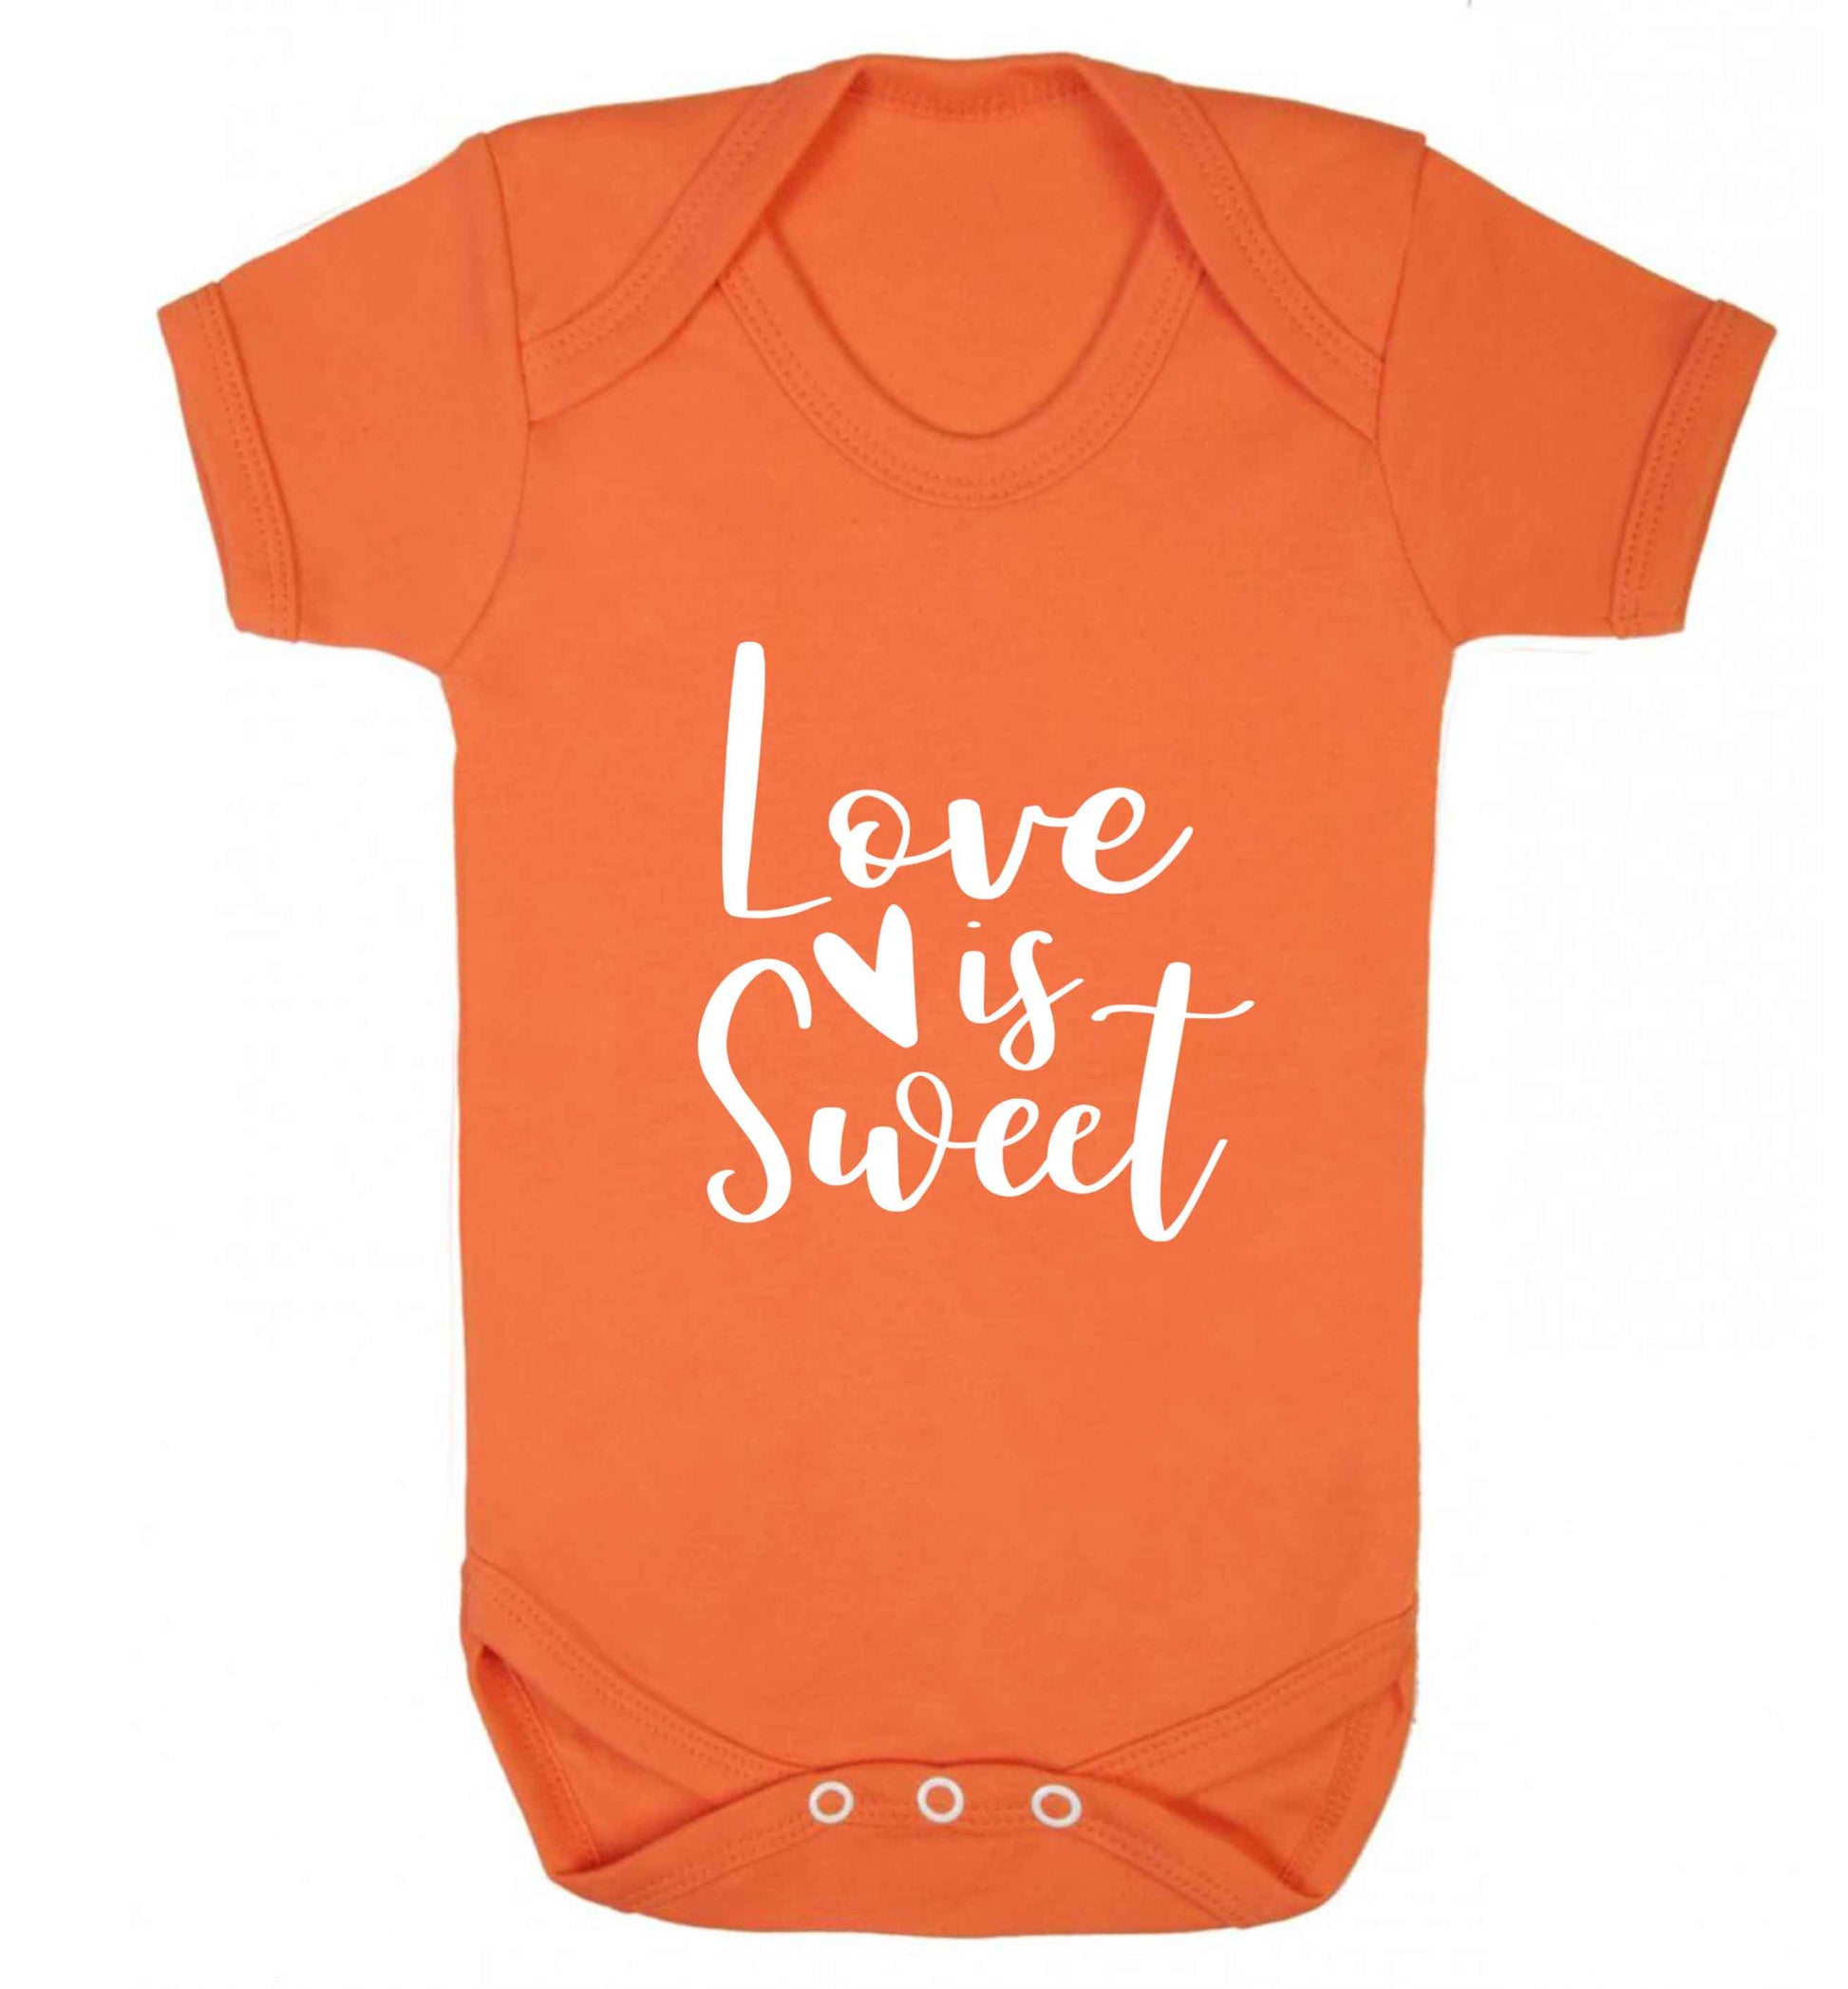 Love really does make the world go round! Ideal for weddings, valentines or just simply to show someone you love them!  baby vest orange 18-24 months